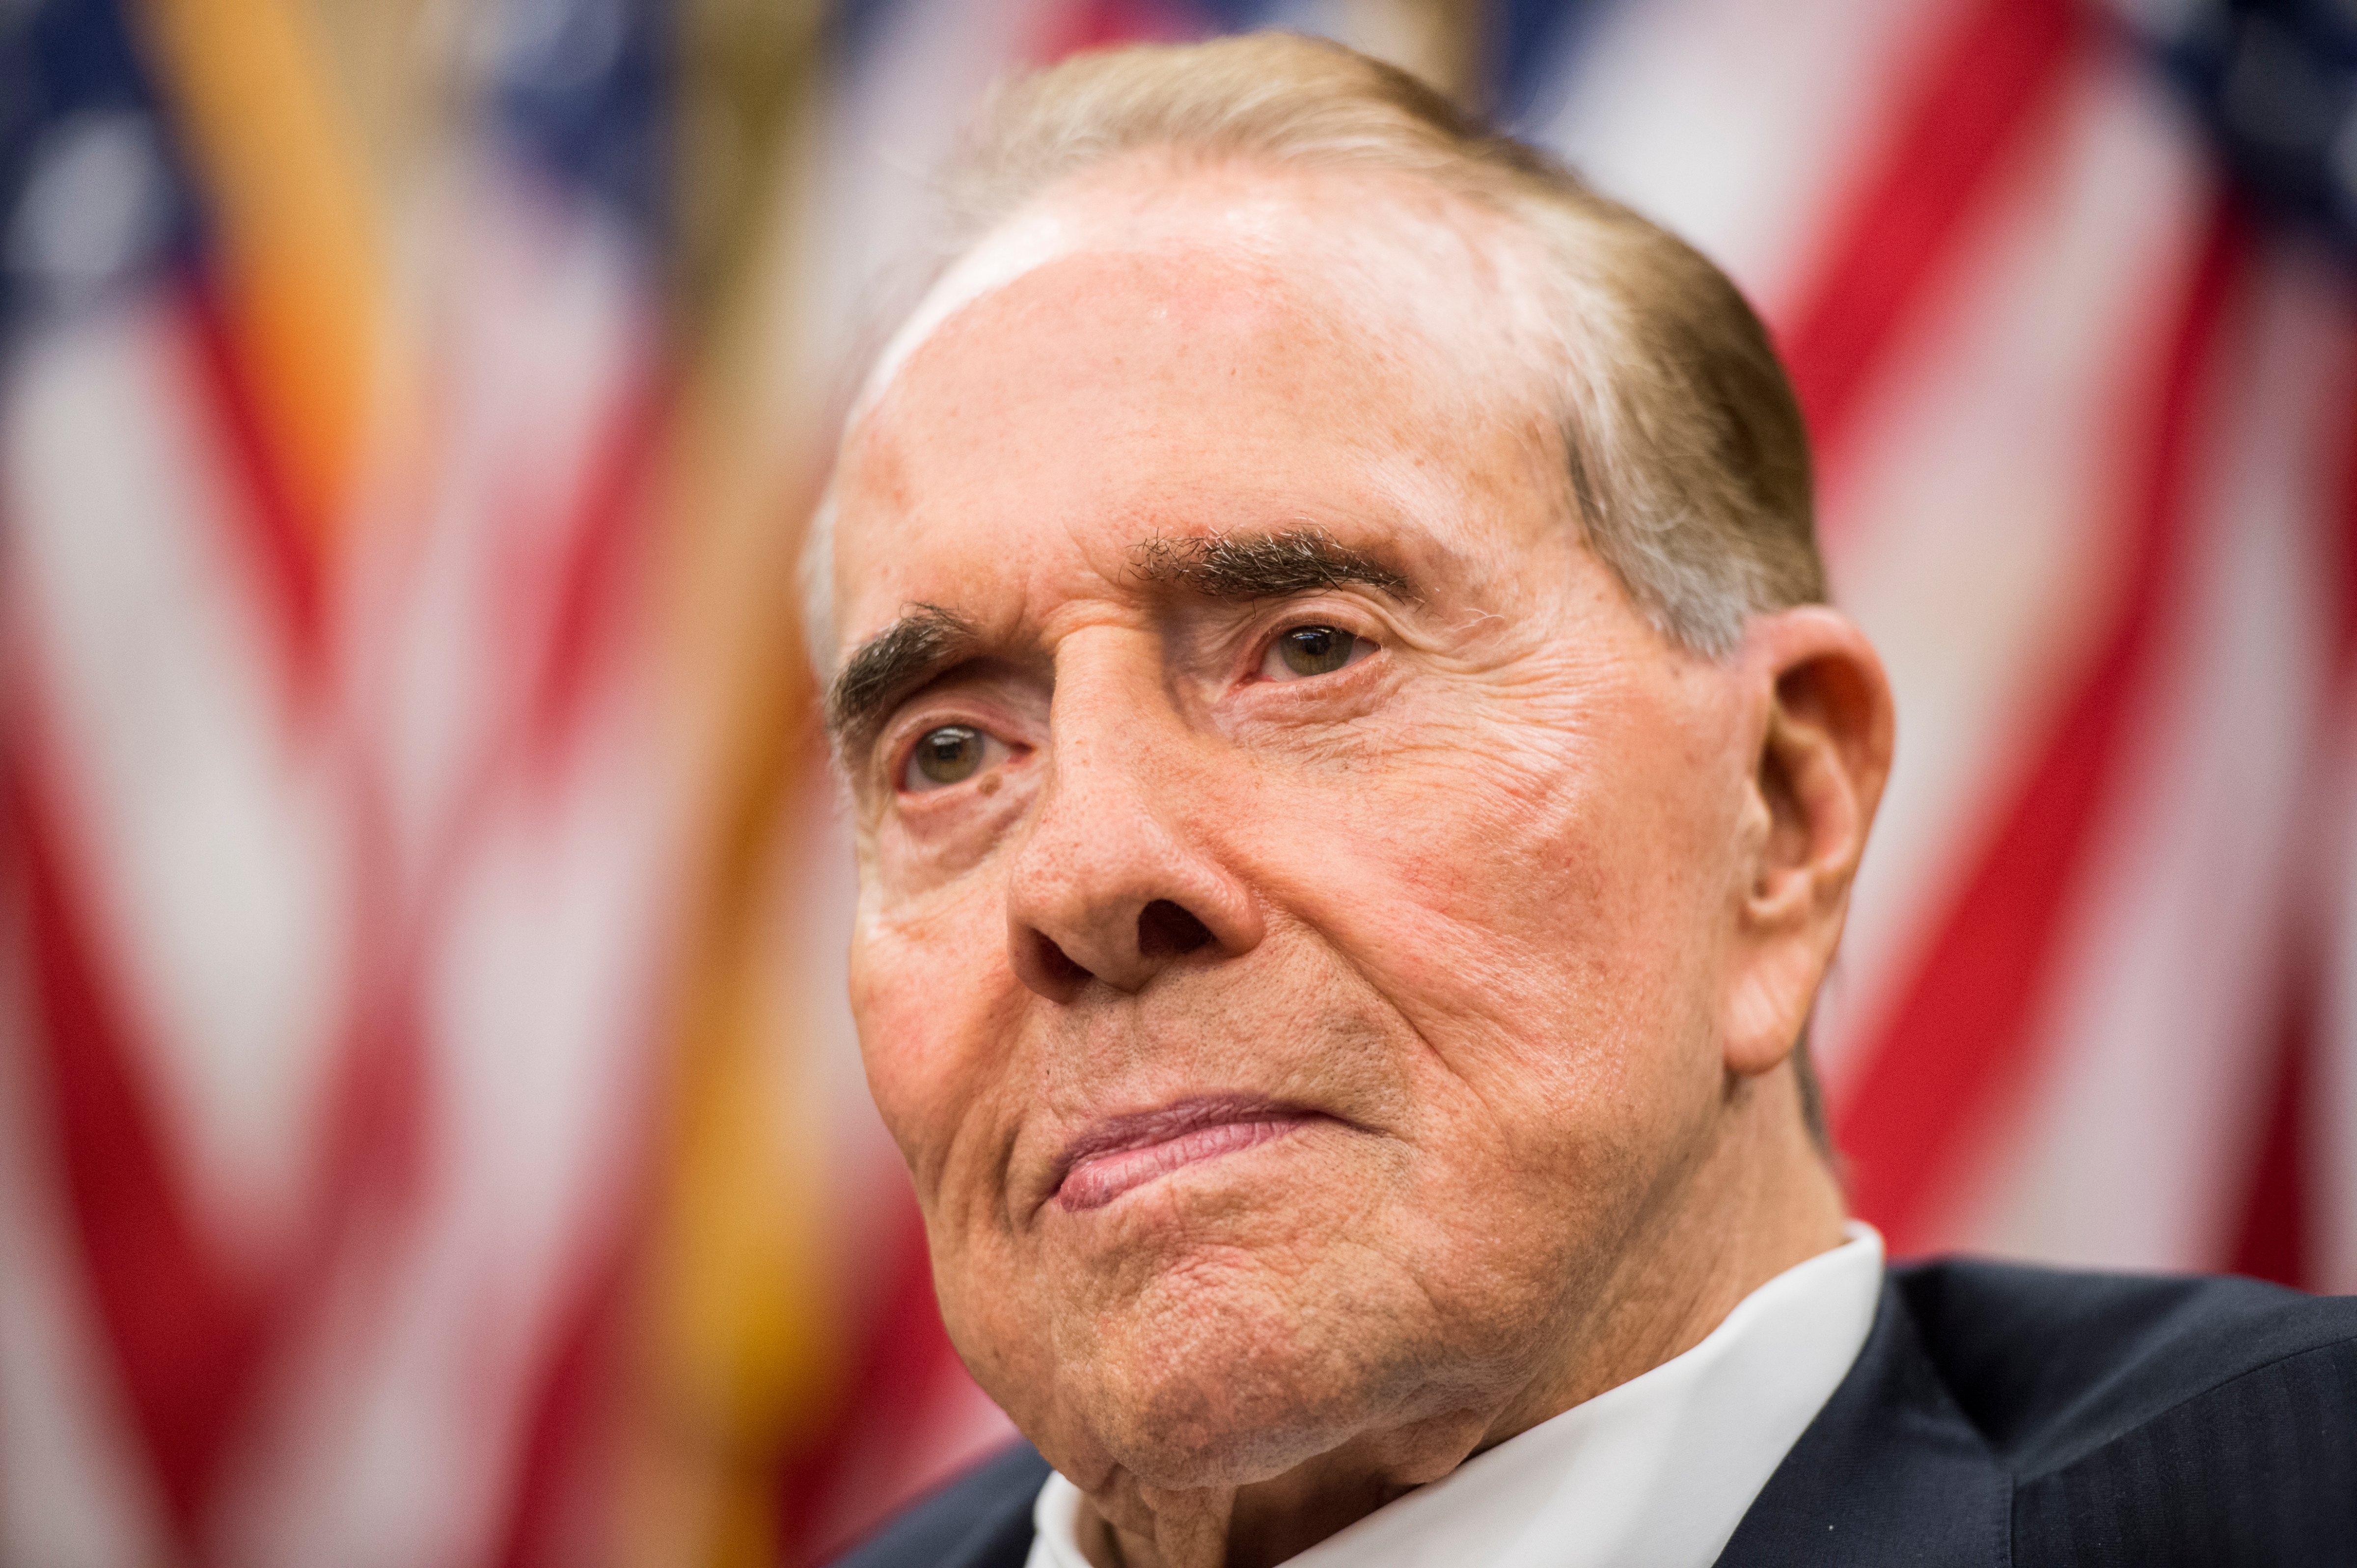 Bob Dole participates in a news conference in the Capitol Visitor Center in Washington, DC on  July 27, 2015. (Bill Clark—Getty Images)